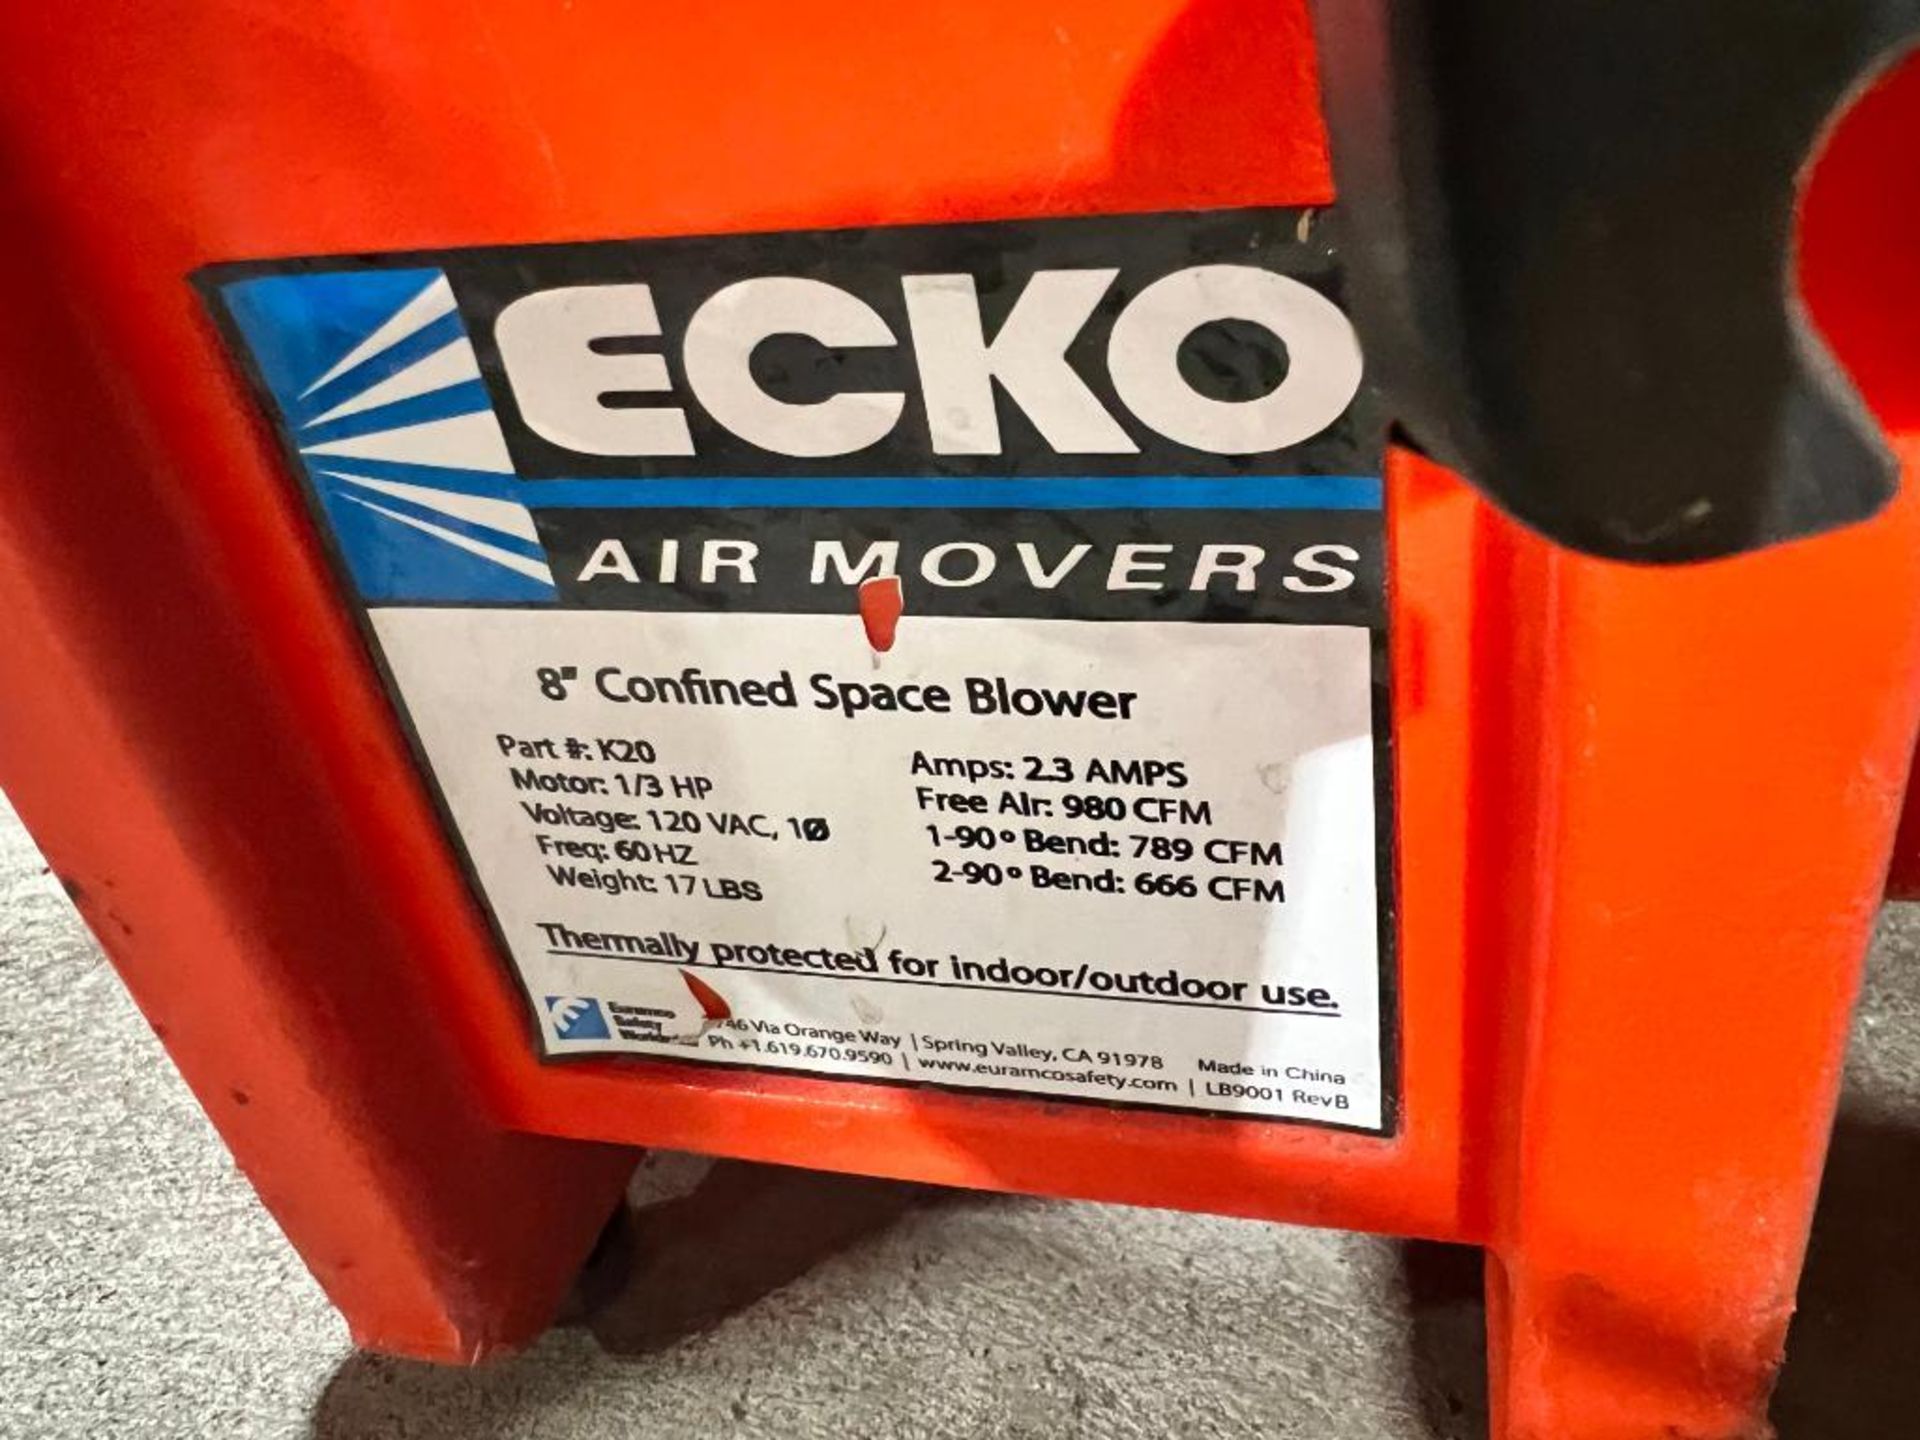 Ecko Air Mover 8" Confined Space Blower - Image 3 of 3